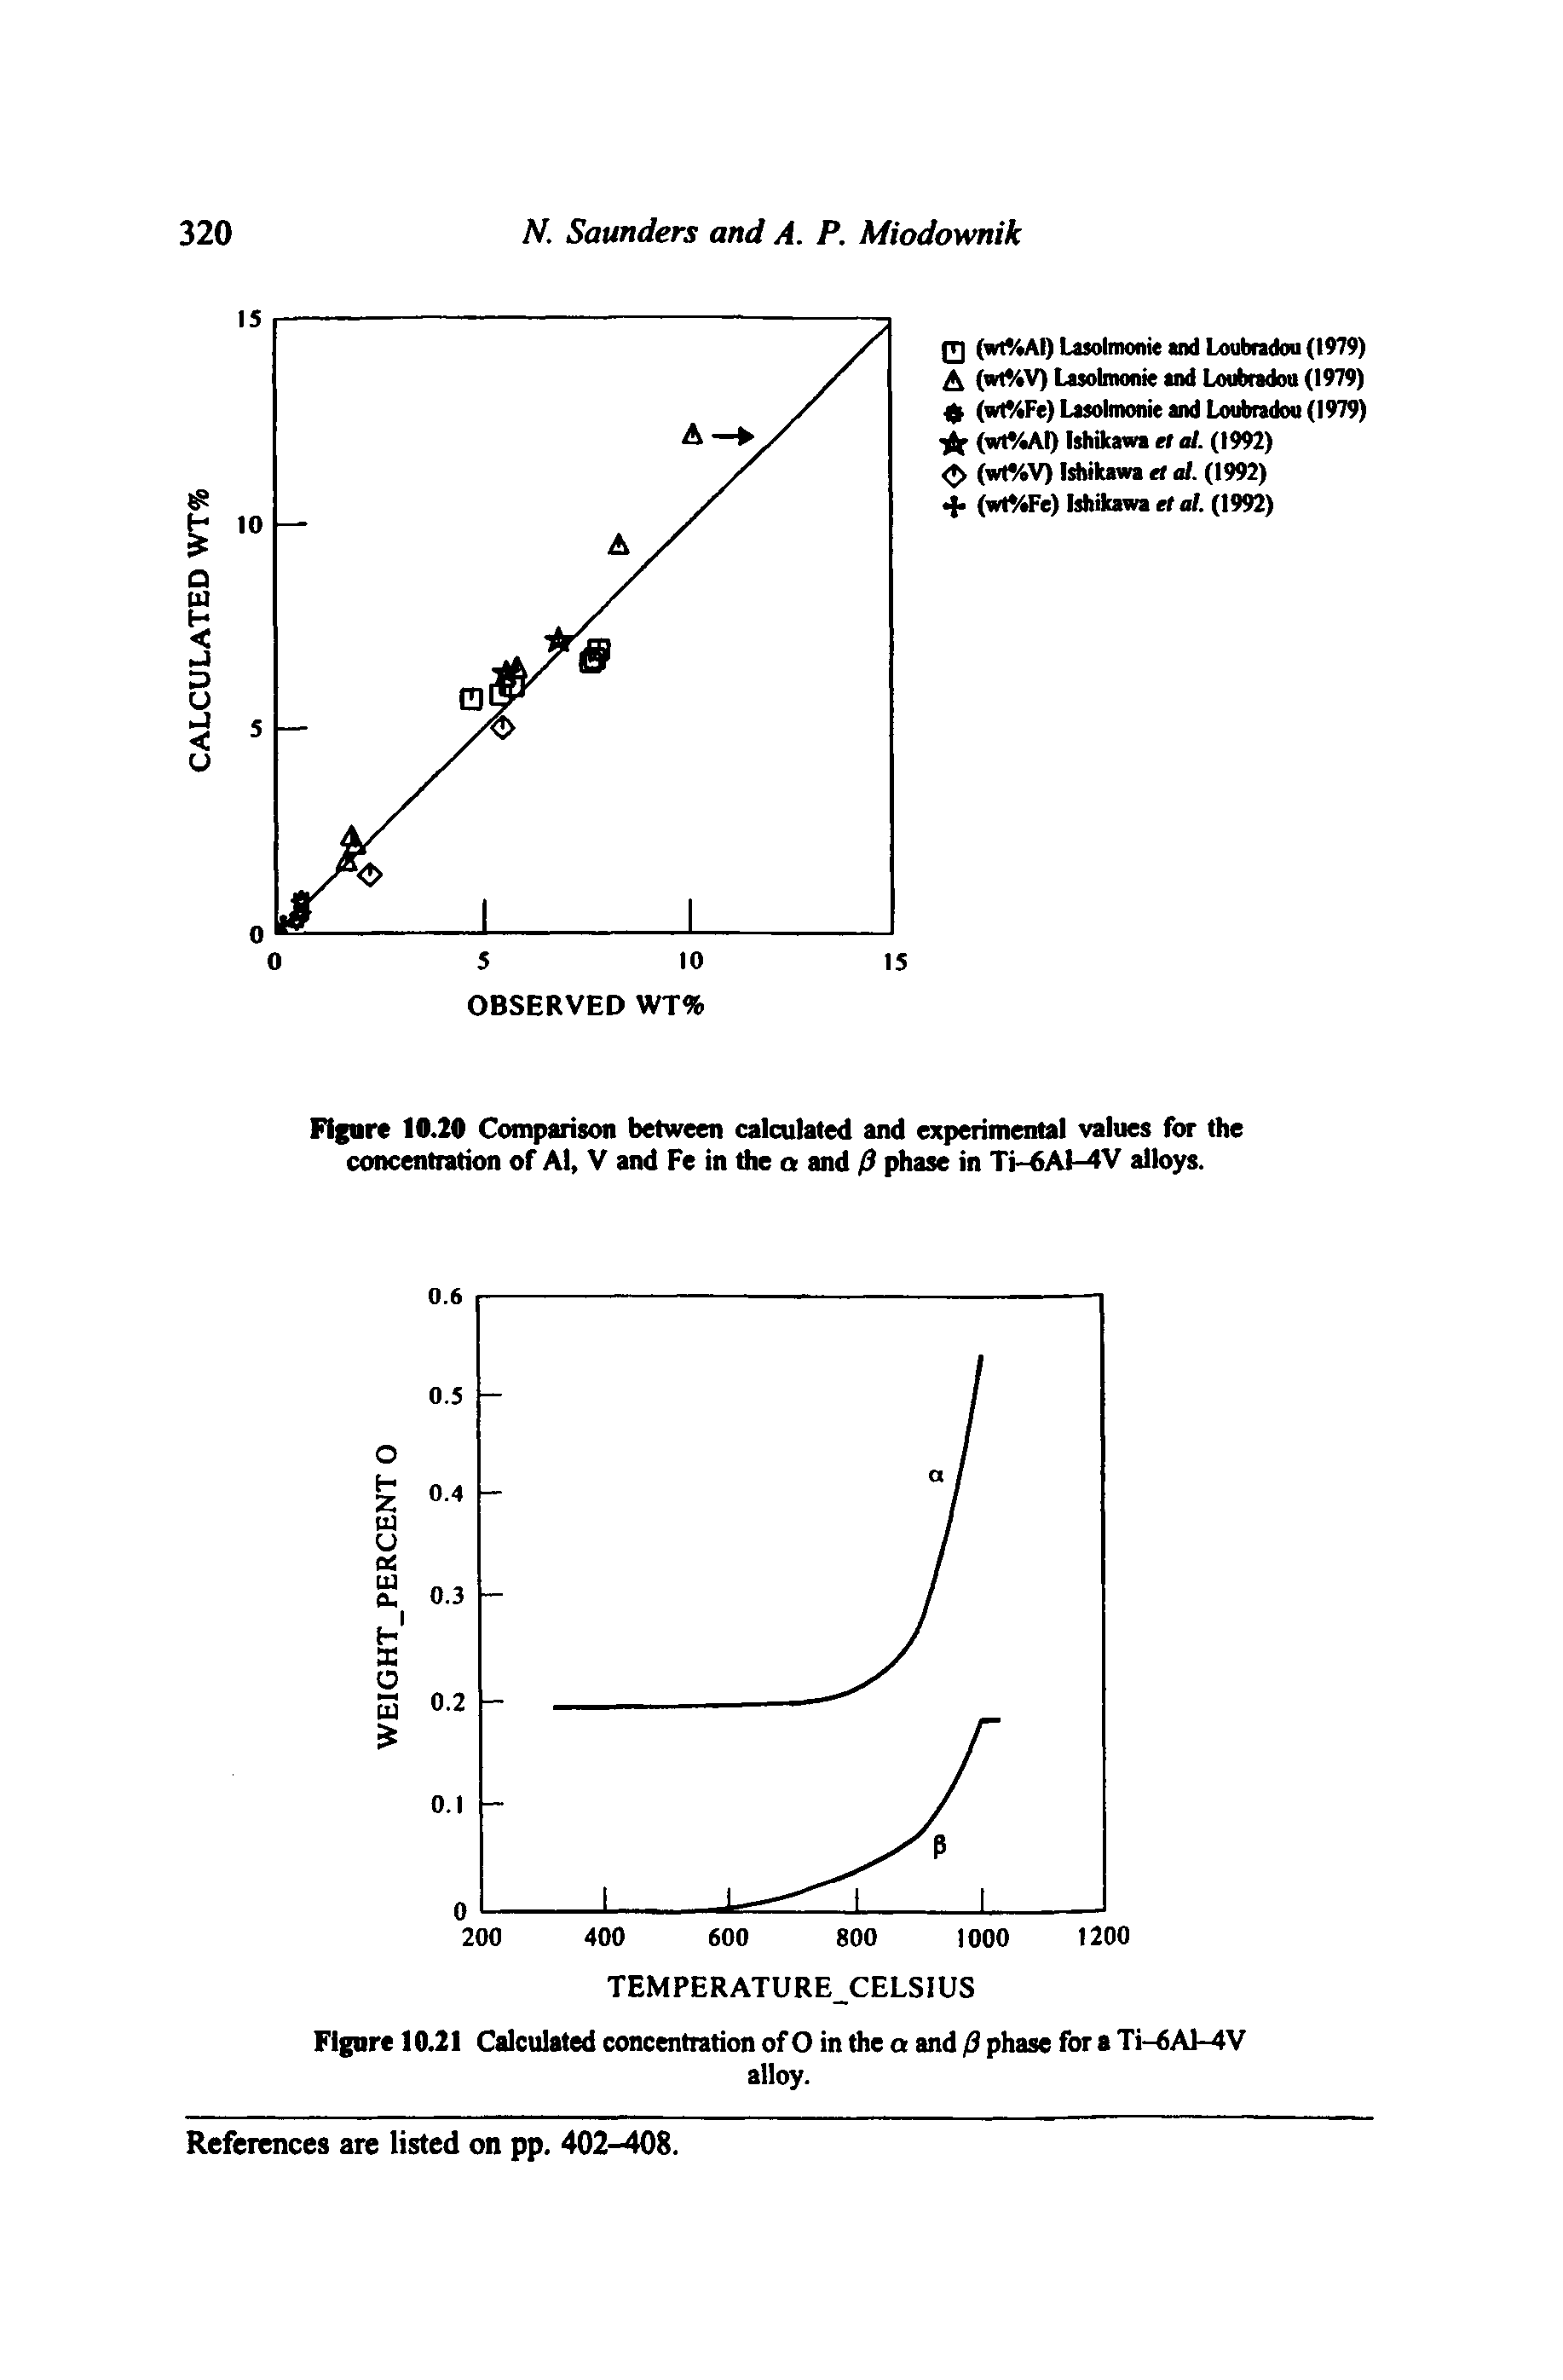 Figure 10.20 Comparison between calculated and experimental values for the concentration of Al, V and Fe in the a and 0 phase in Ti-6At-4V alloys.